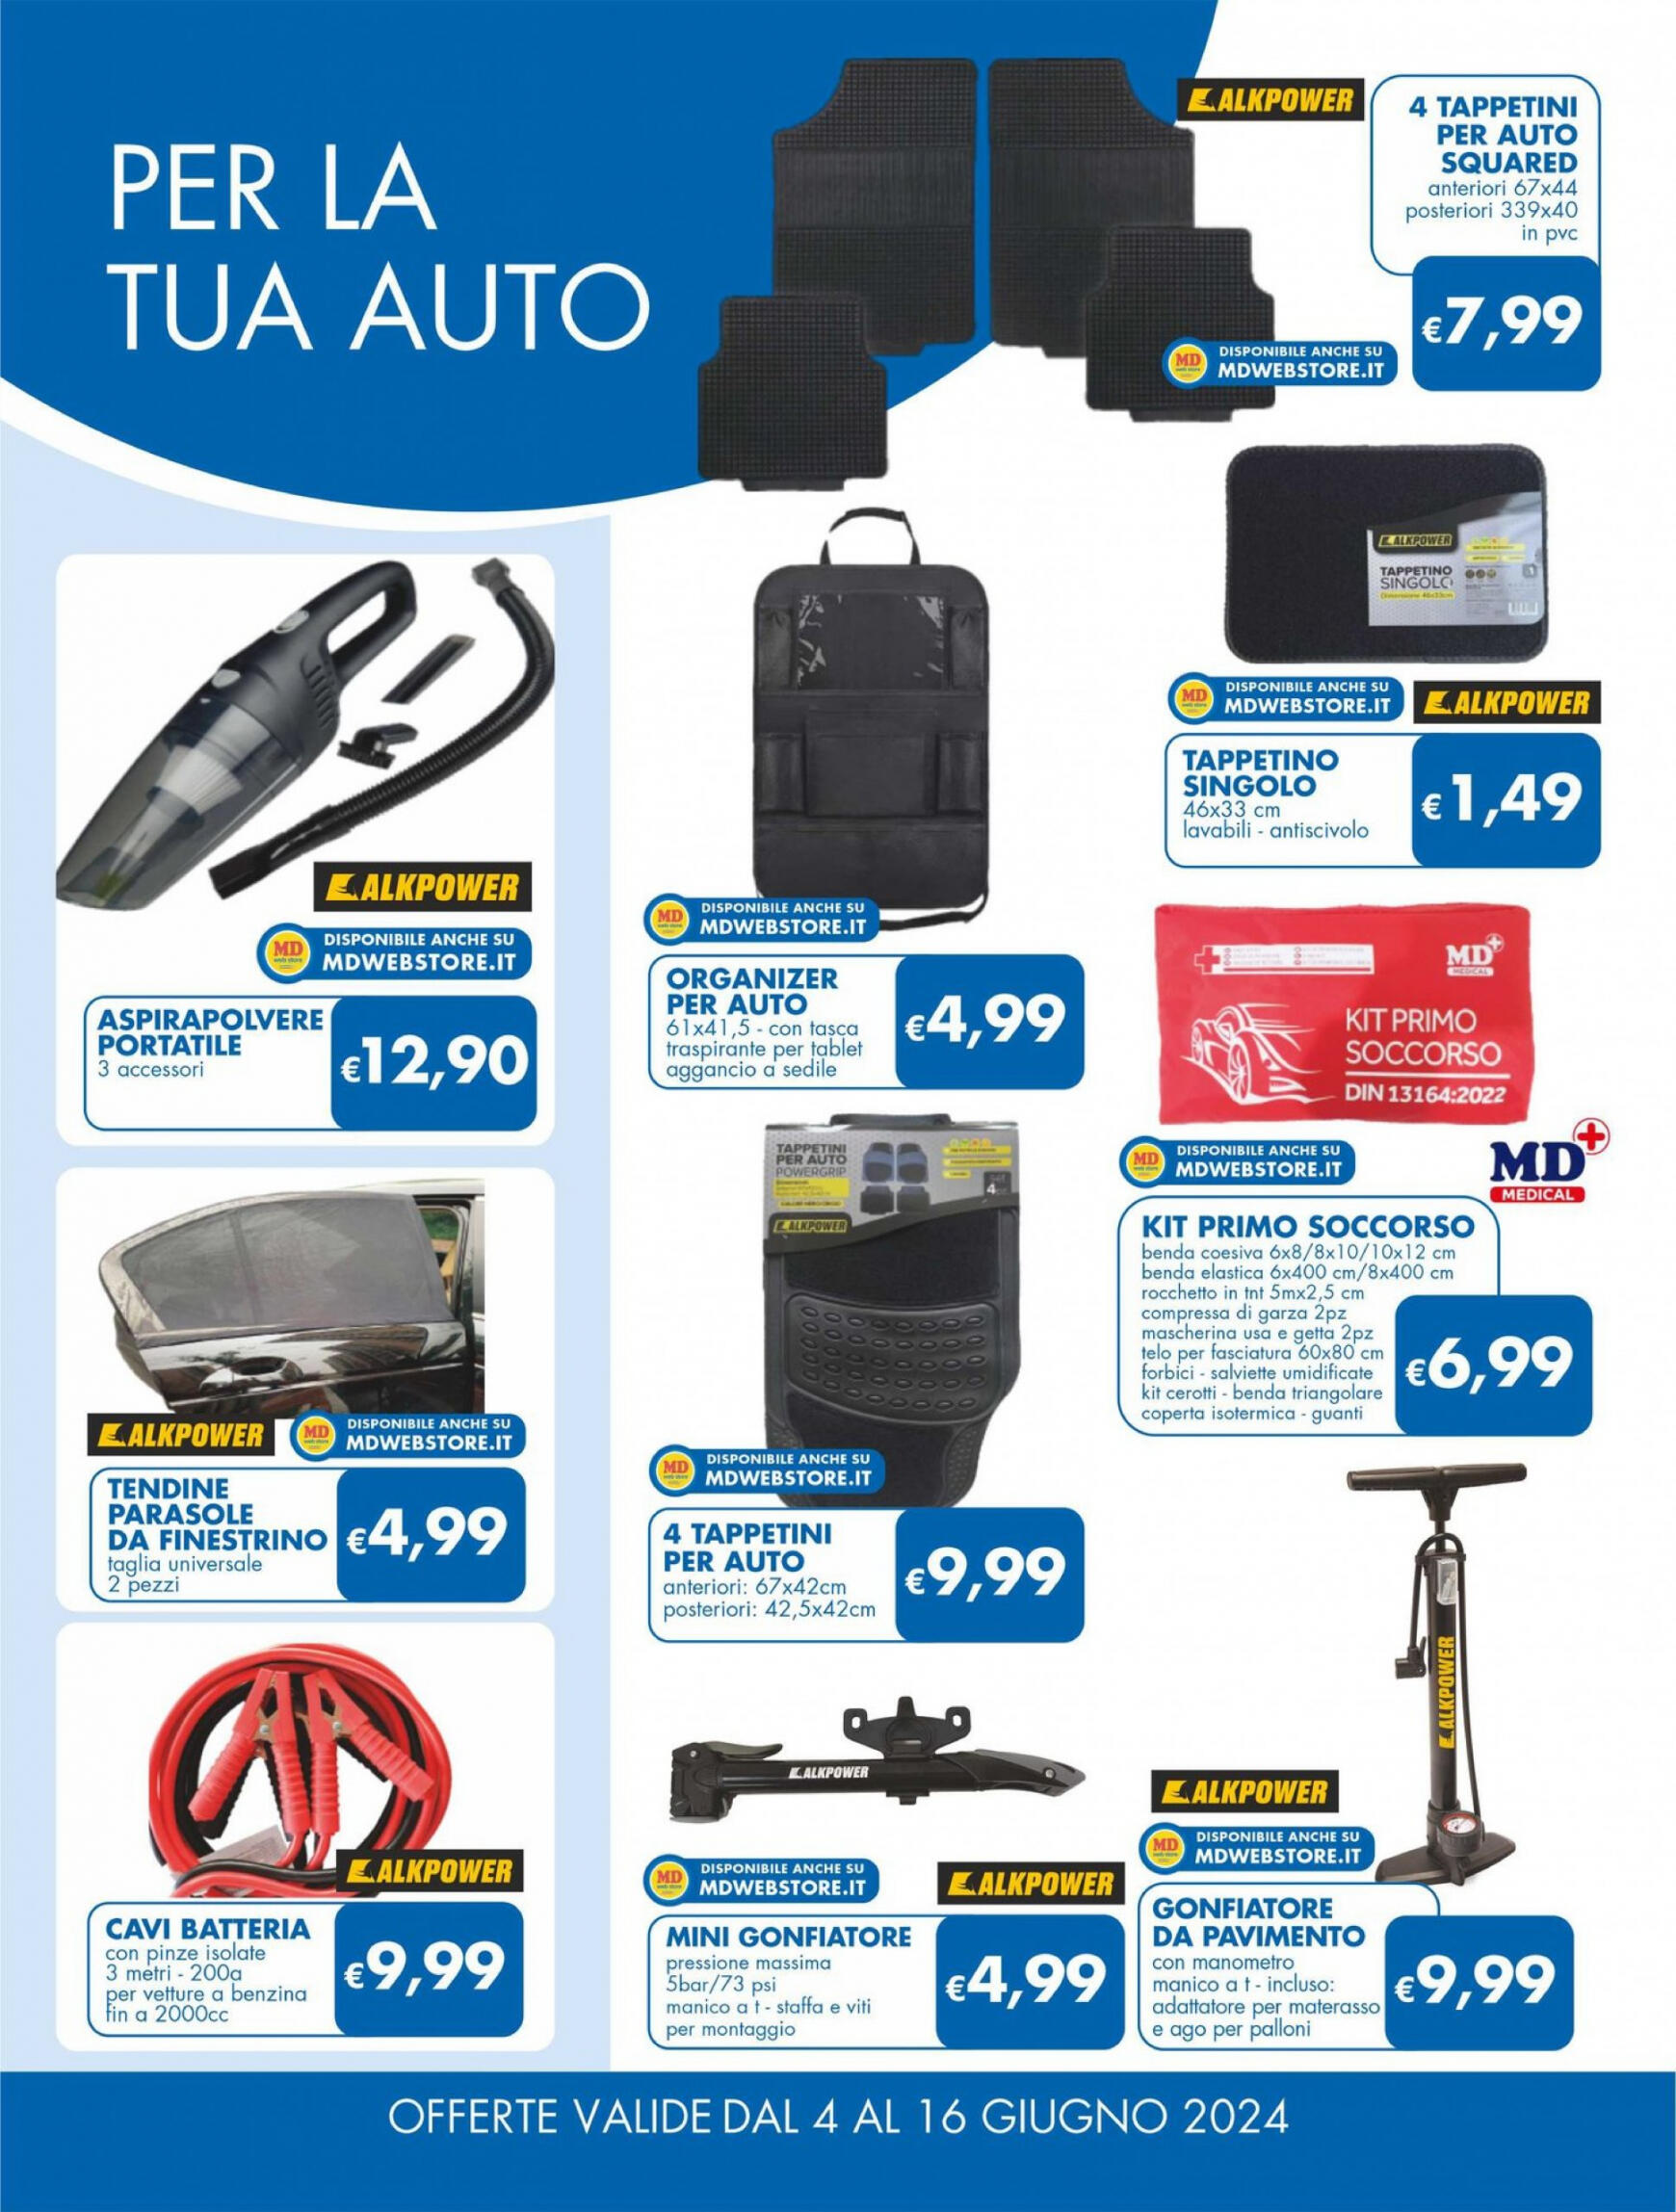 md-discount - Nuovo volantino MD 04.06. - 16.06. - page: 29